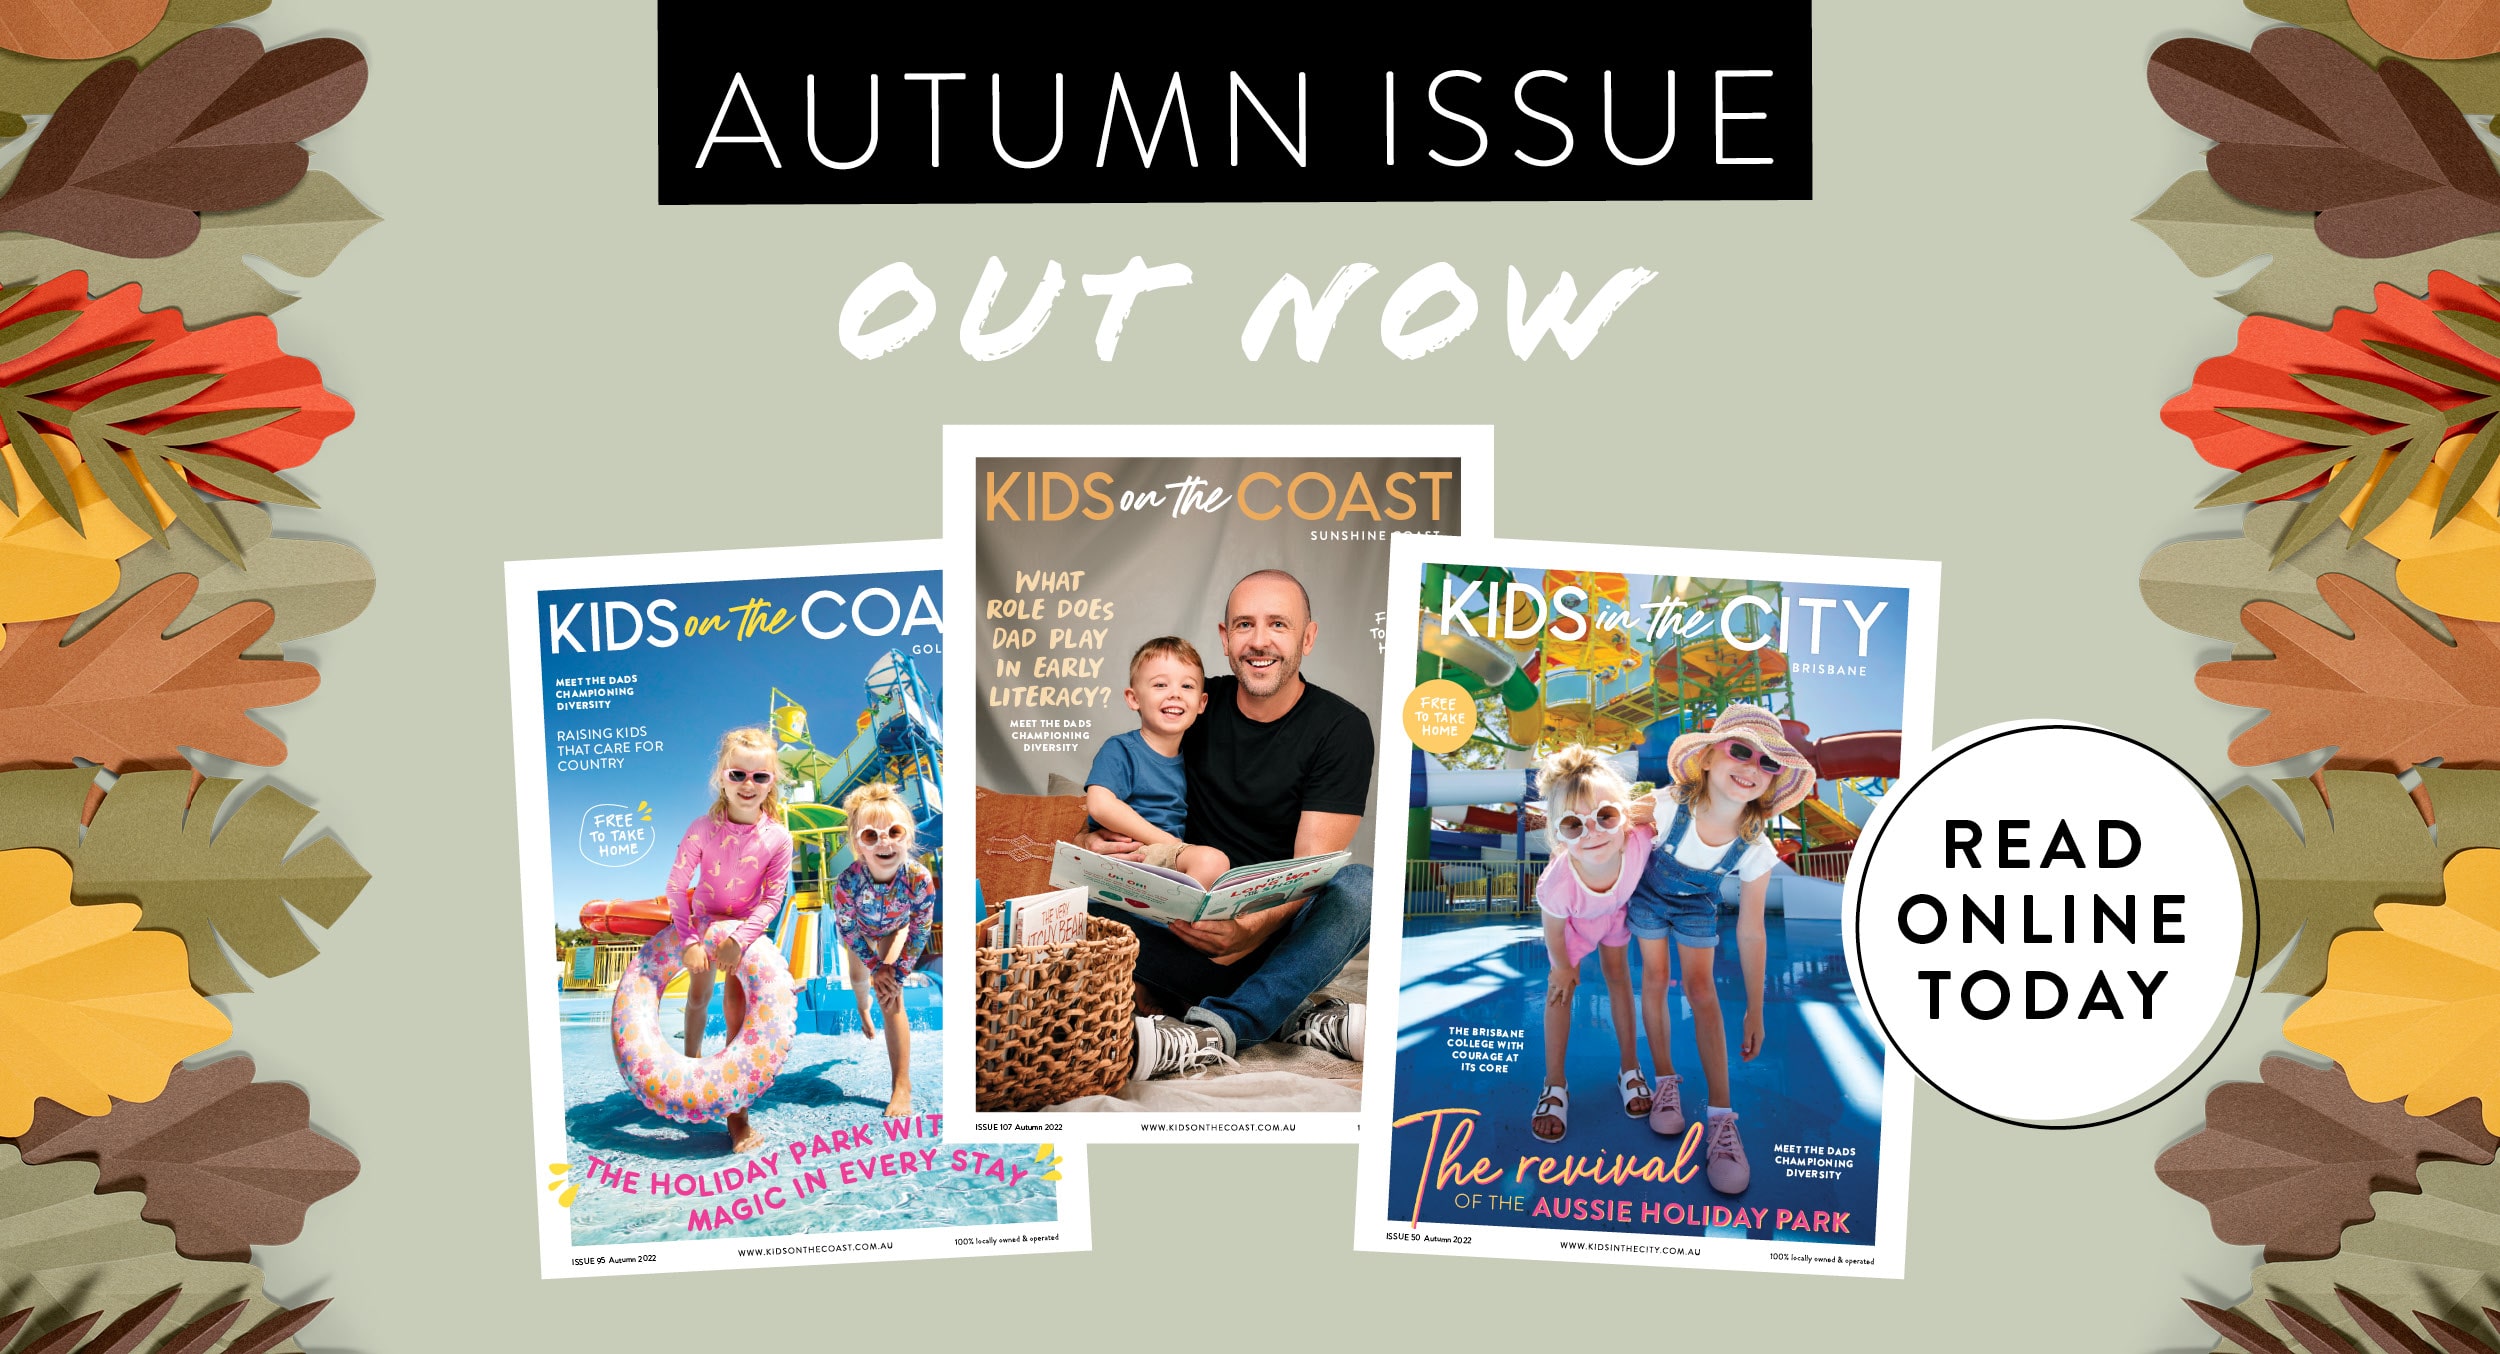 Autumn issue out now